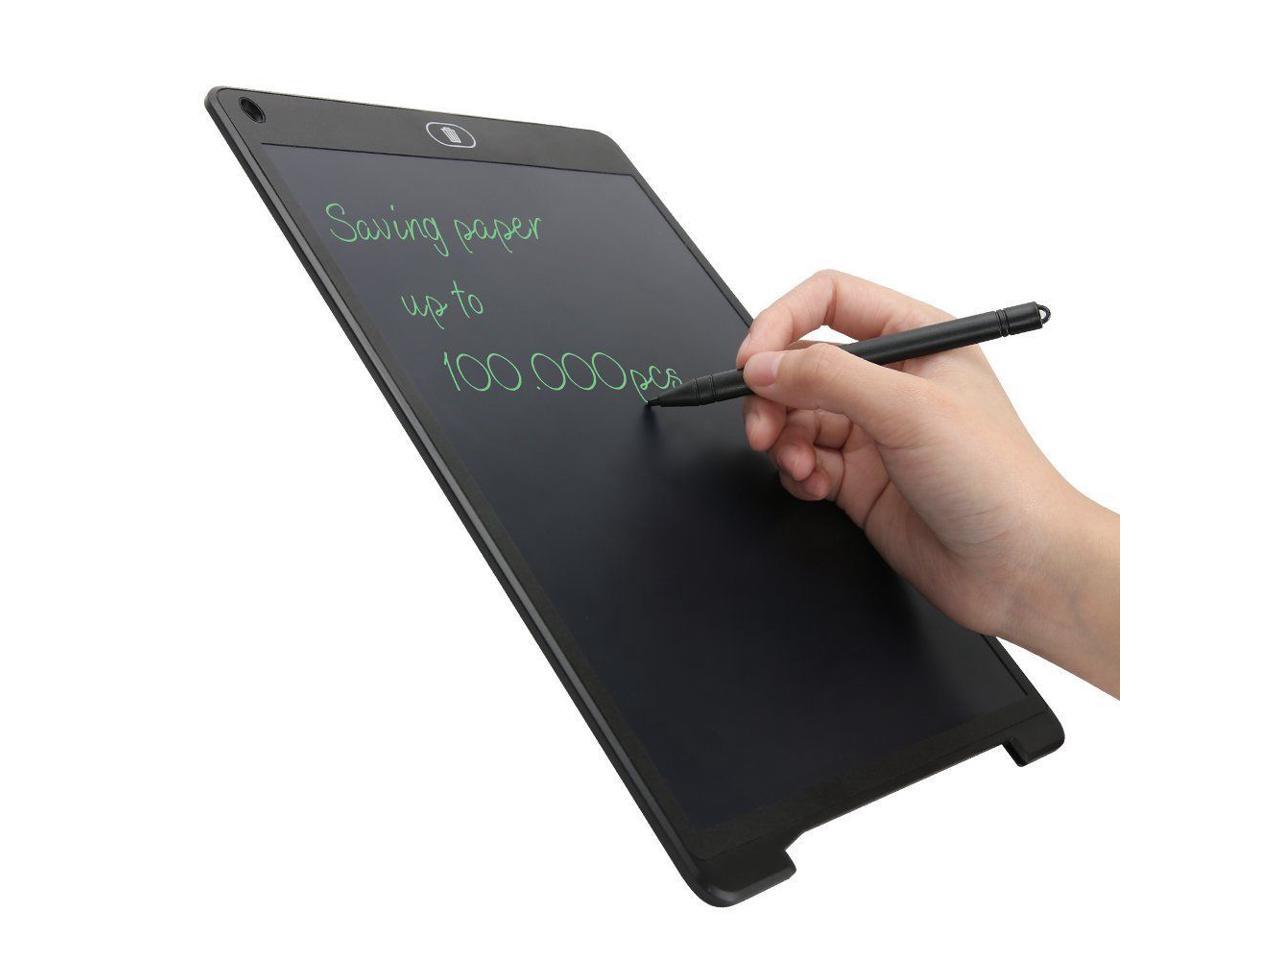 Light Energy Electronic Drawing Board T osuny 16 Inch Color LCD Writing Pad for Writing to‑do Lists Appointment Reminders,Short Memos Shopping Lists with a Writing Pen White